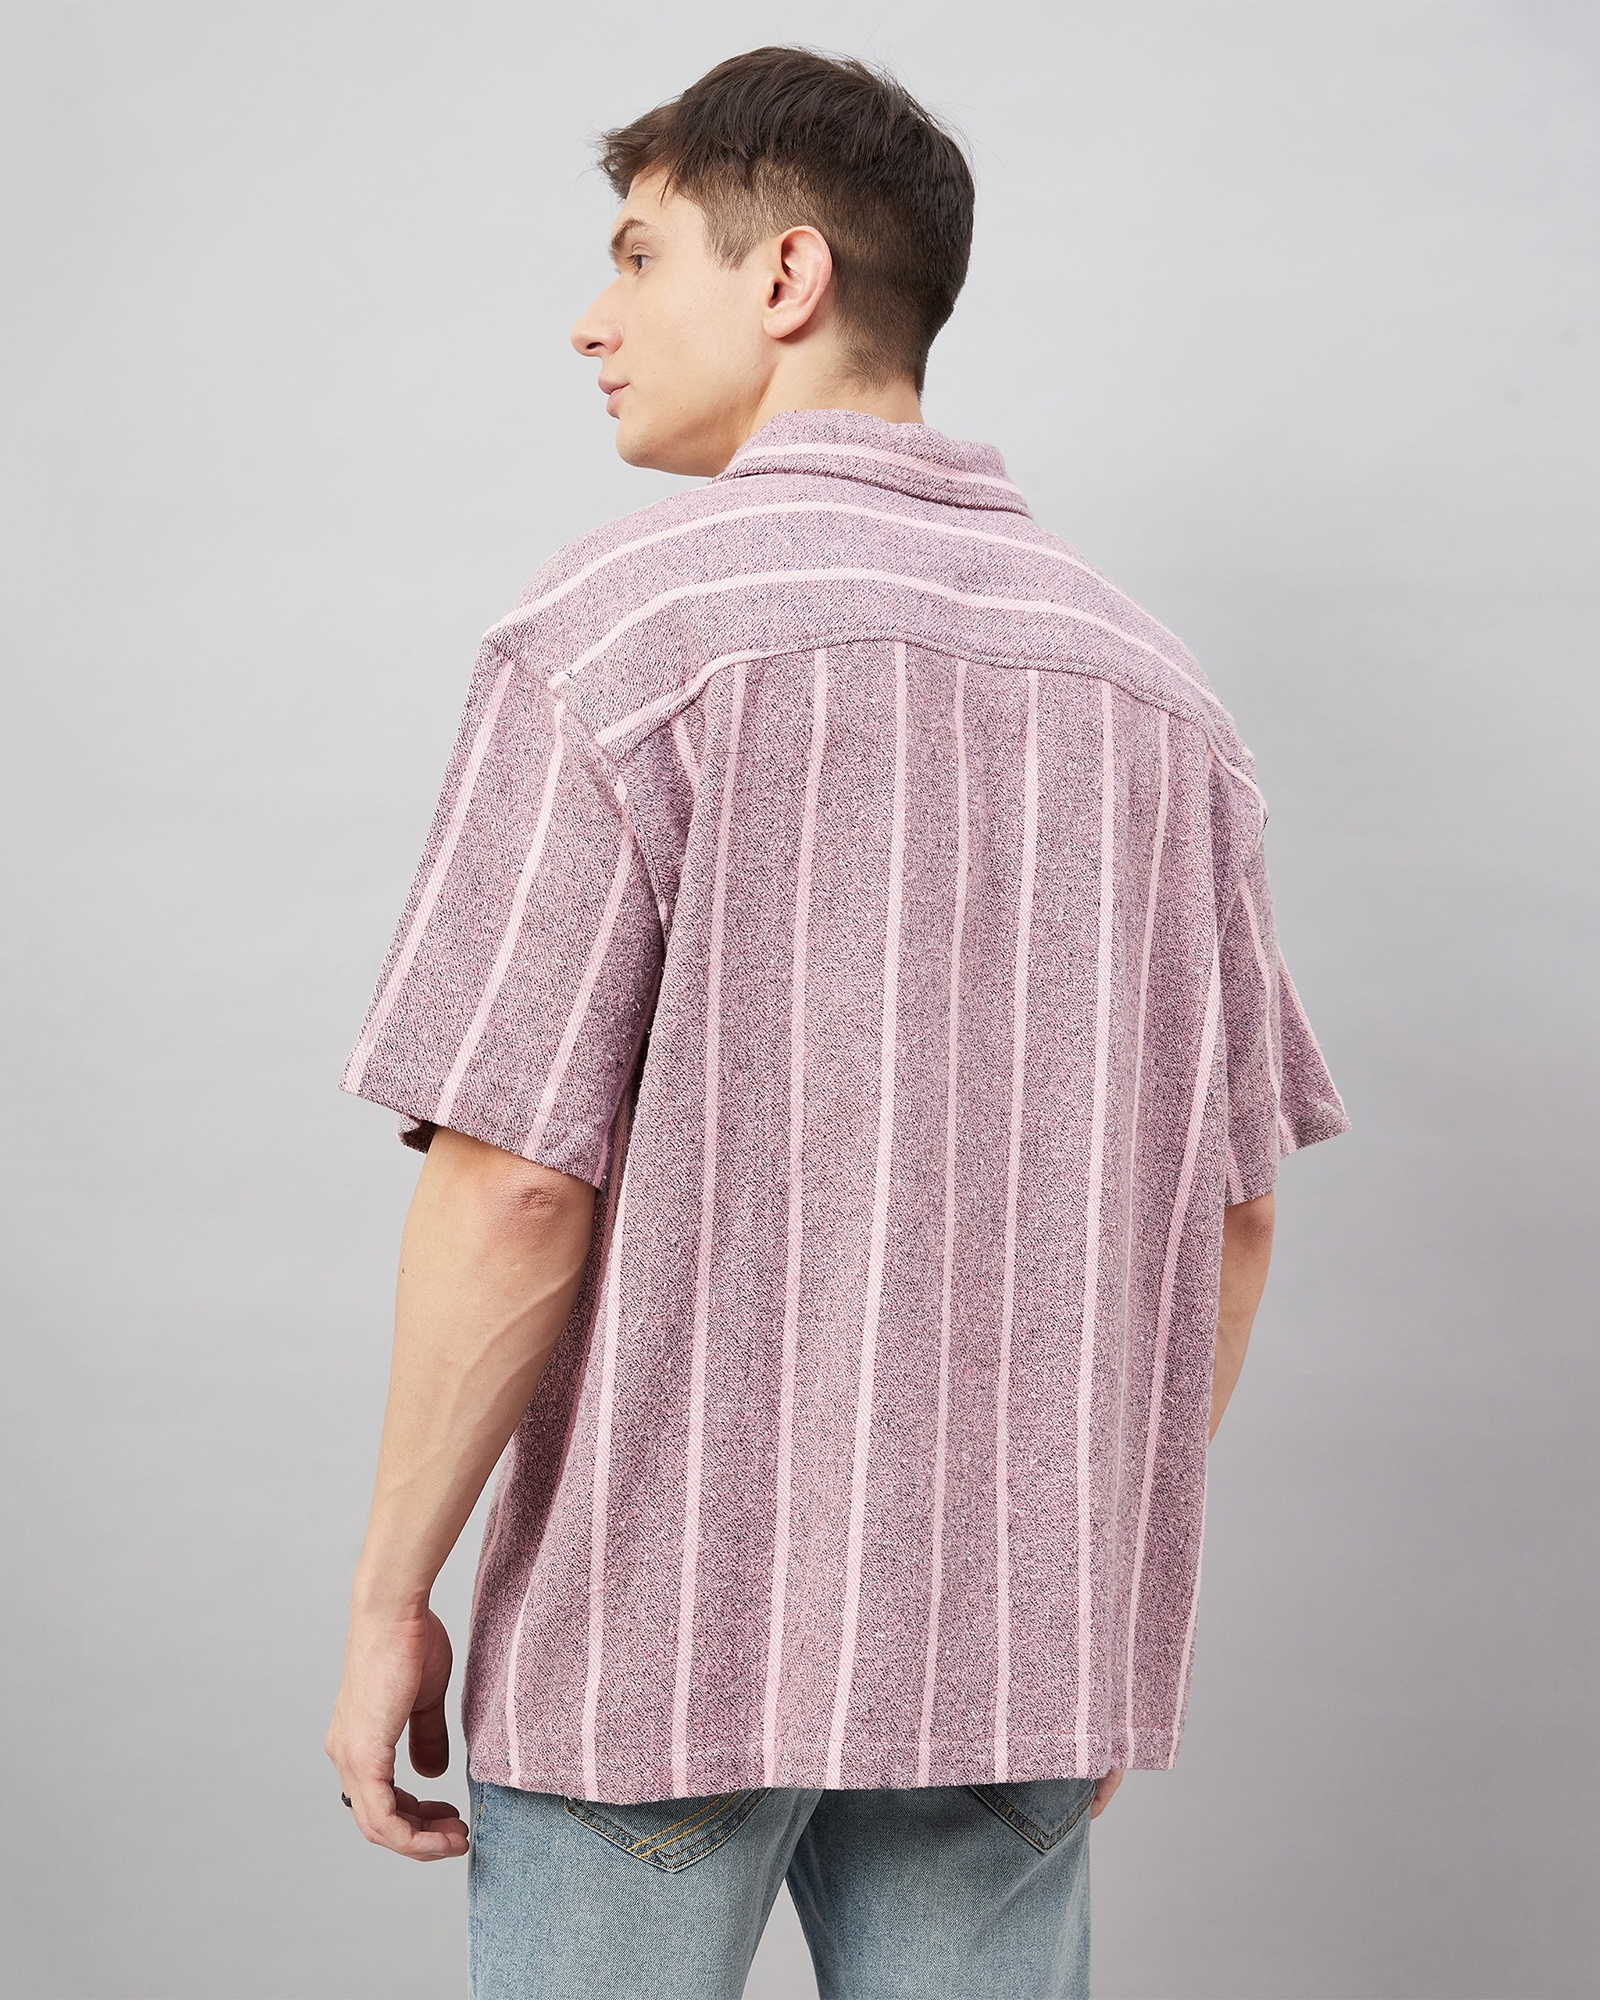 Chimpaaanzee Men Pink and White Oversized Fit Shirt